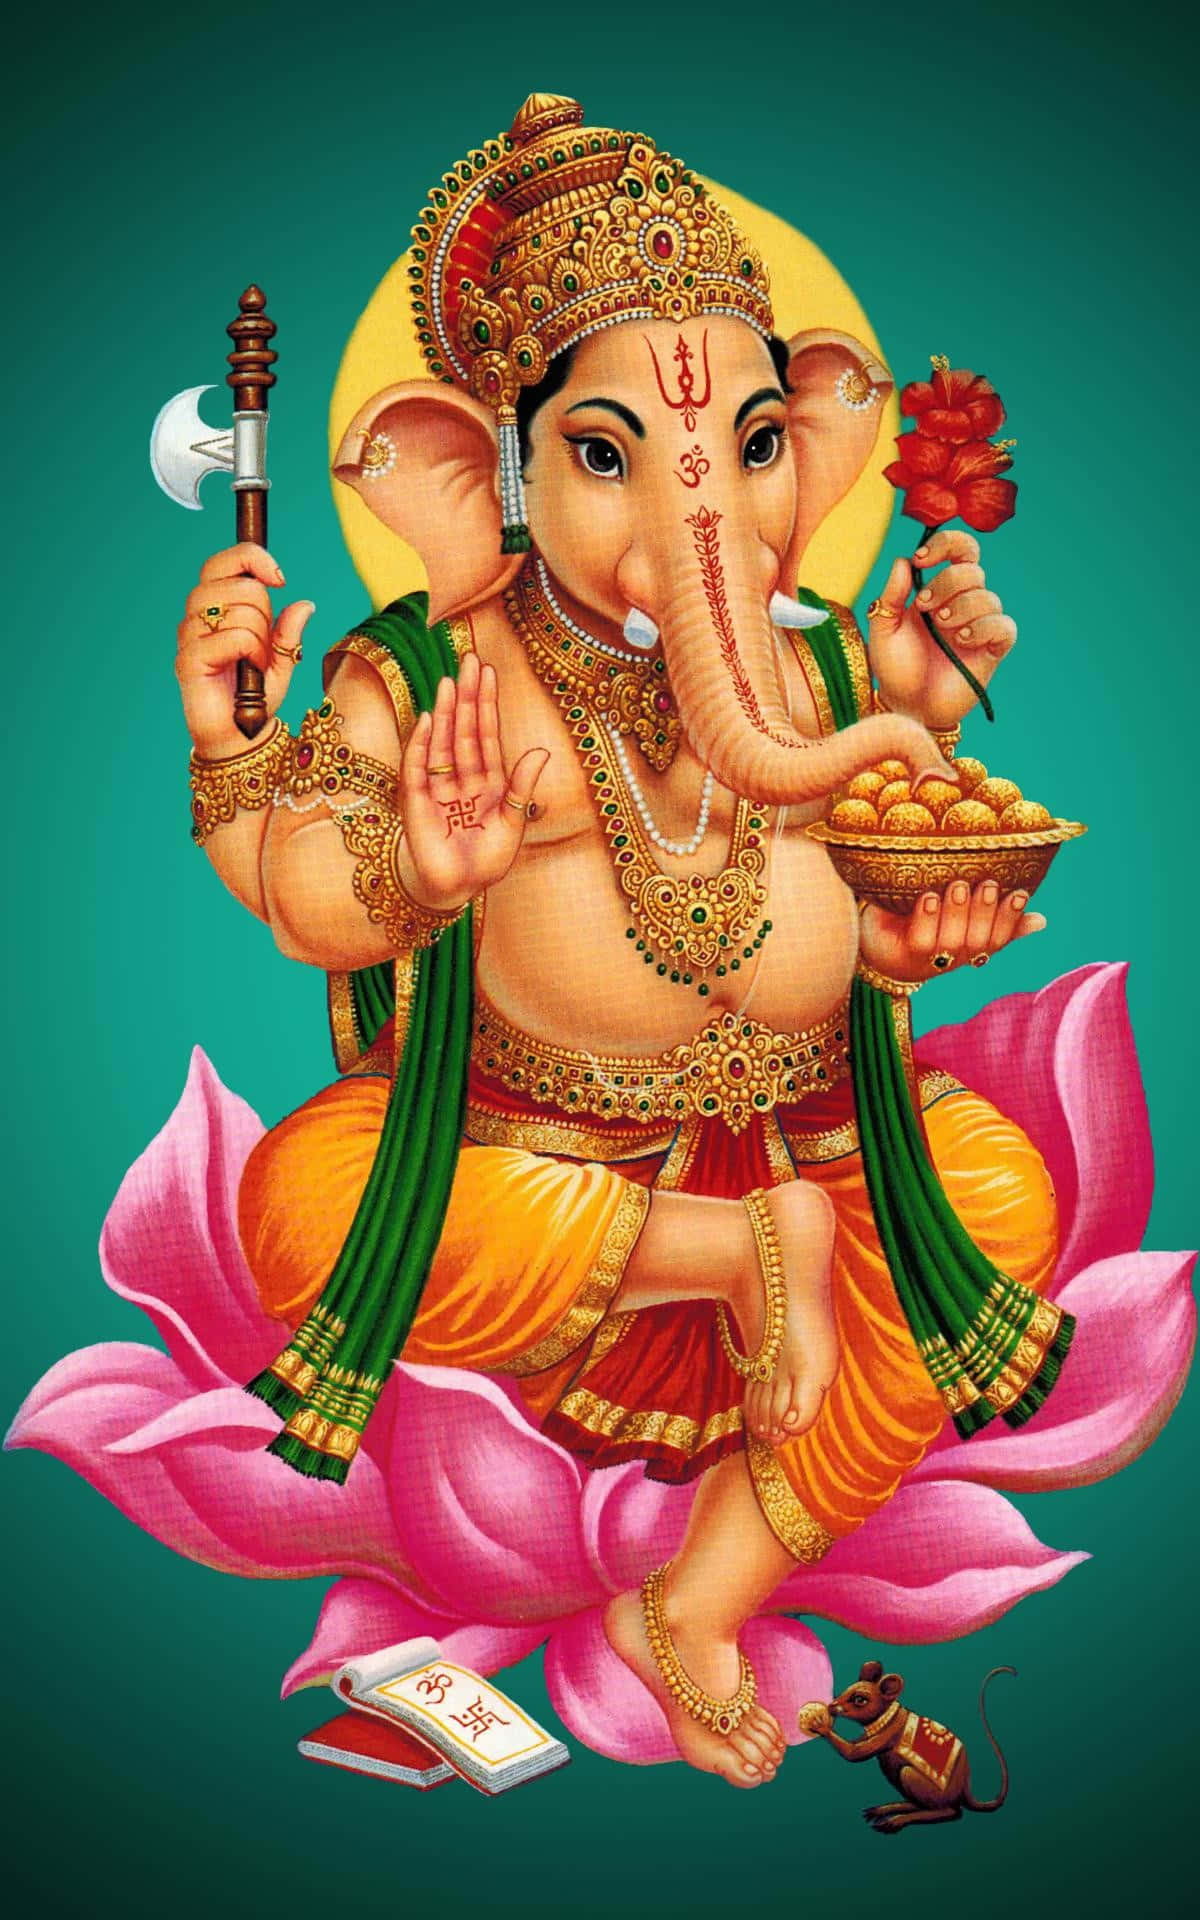 Ganesha Sitting On A Lotus With A Knife